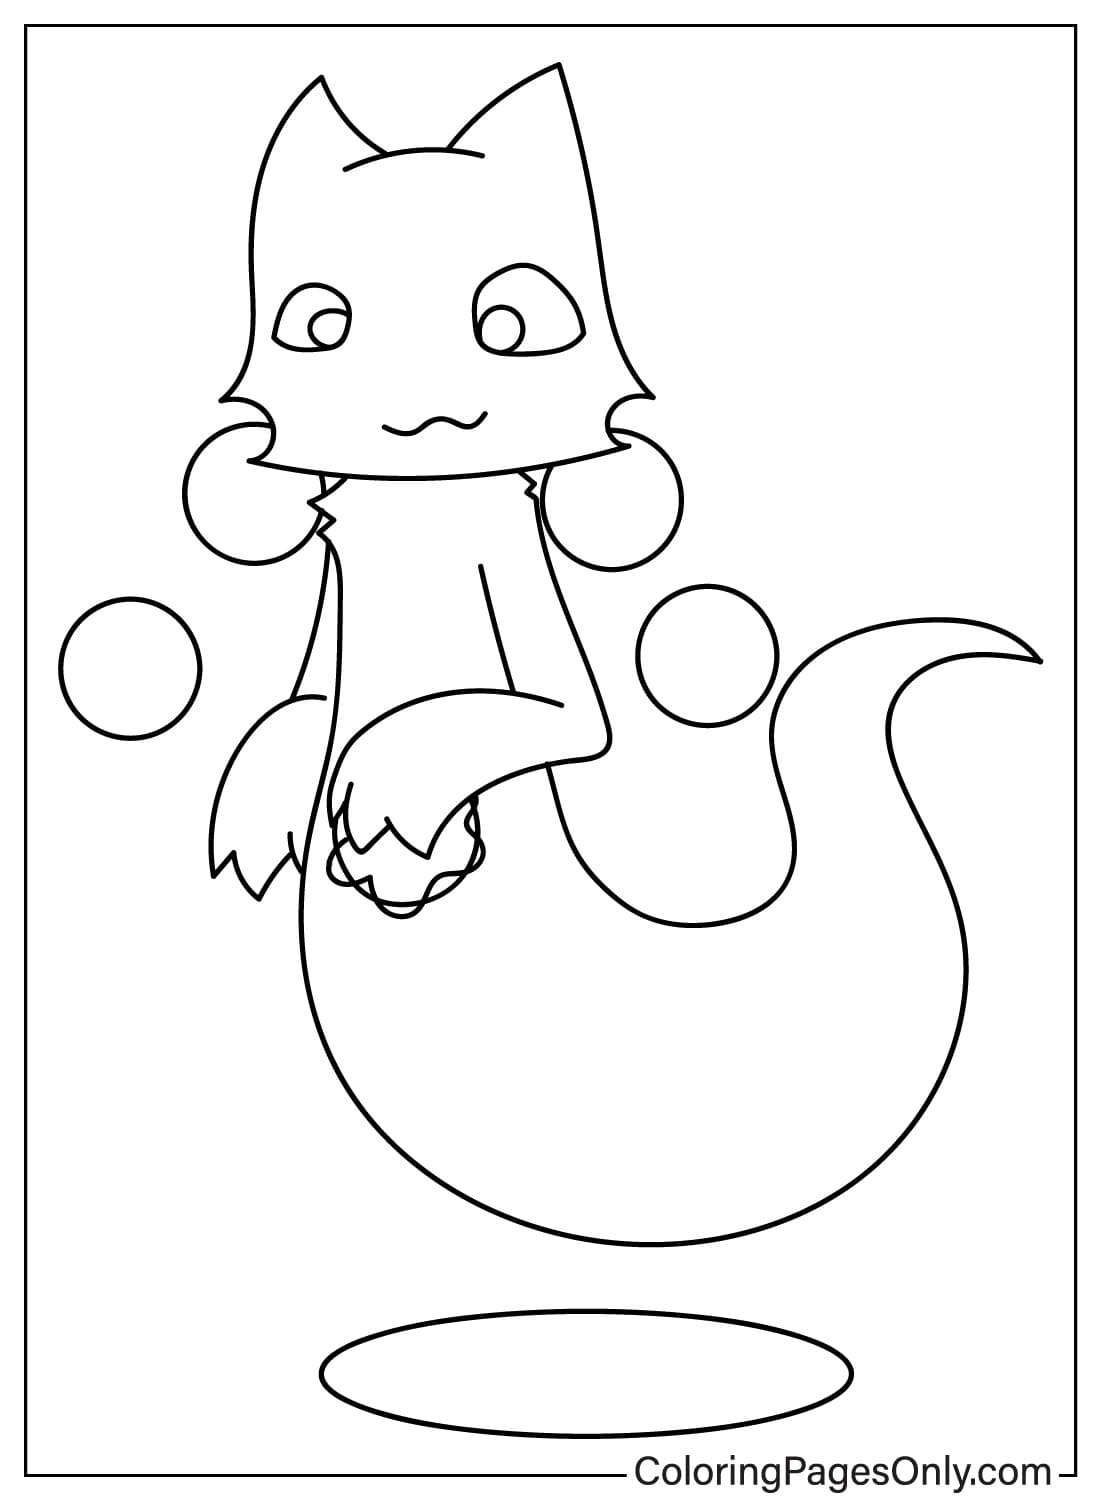 Free Ghazt Coloring Page from Ghazt